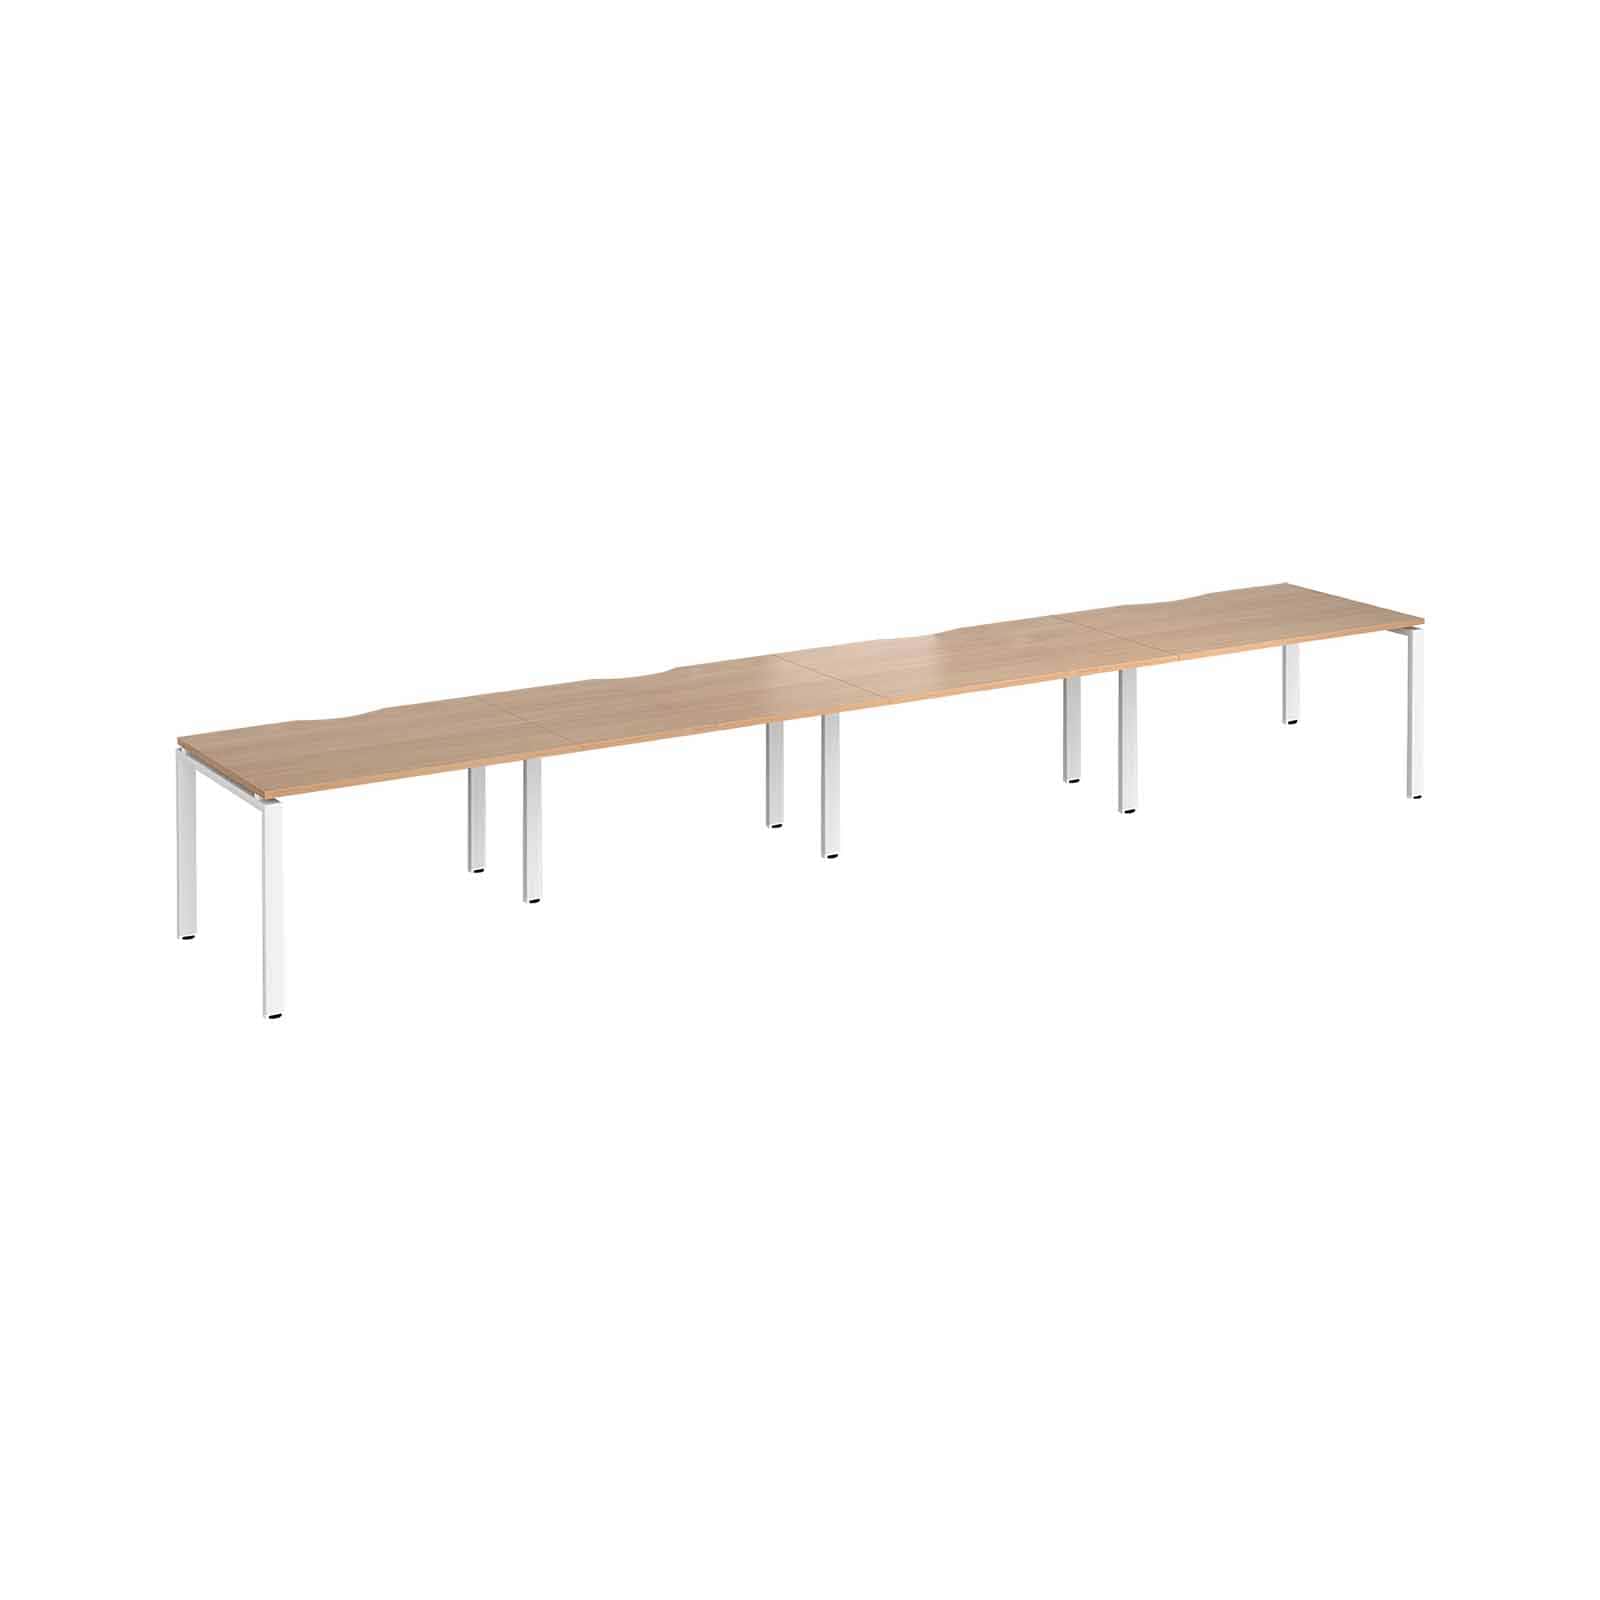 MADE TO ORDER 4 Person Single Row Bench Desk W1000mm x D600mm x H740mm